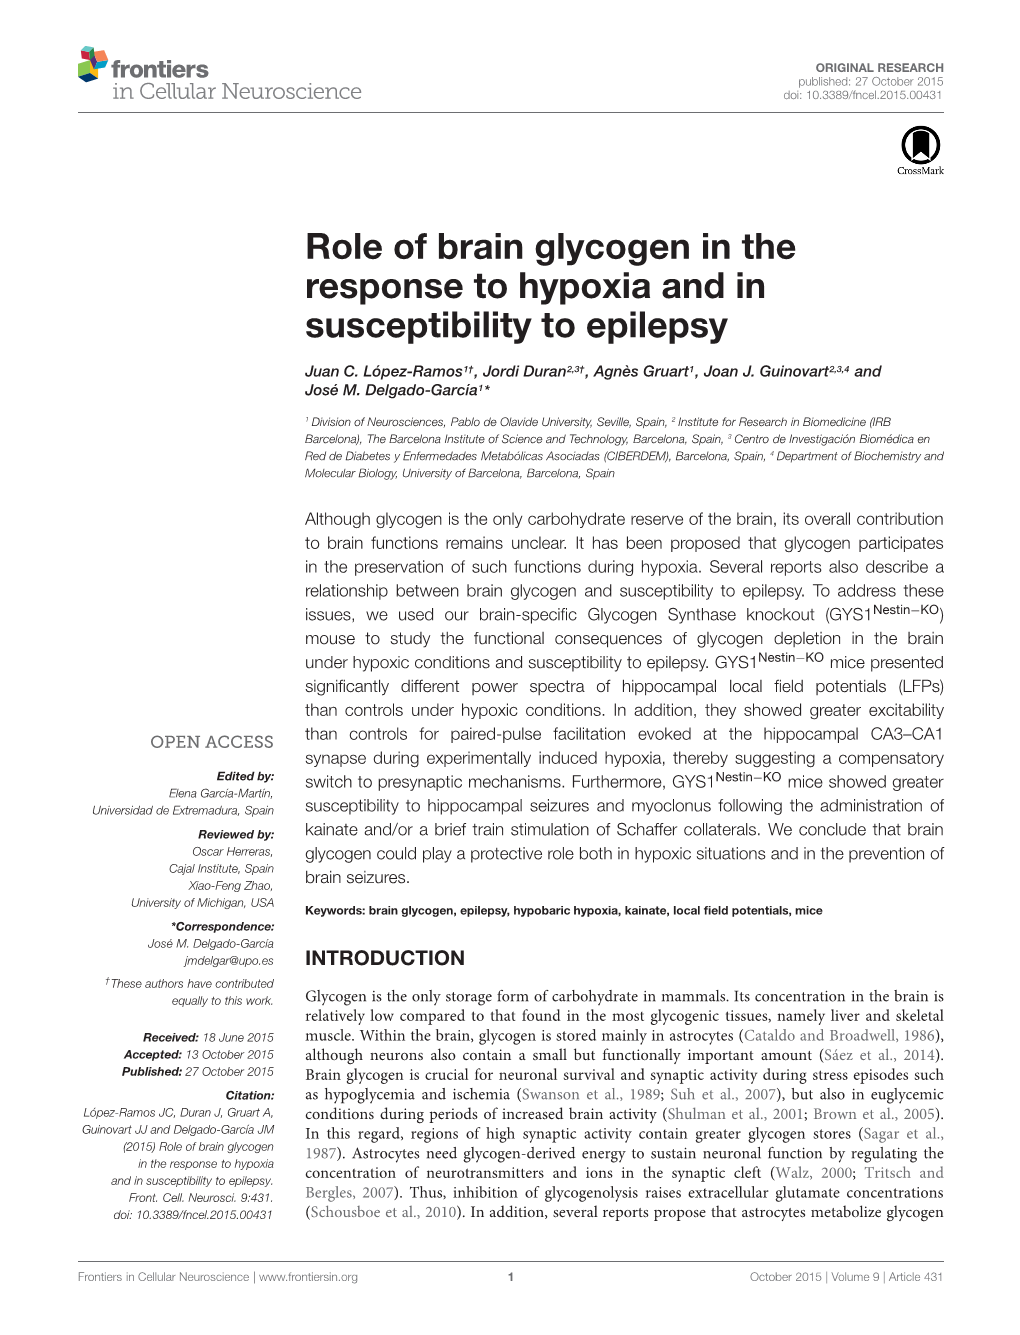 Role of Brain Glycogen in the Response to Hypoxia and in Susceptibility to Epilepsy